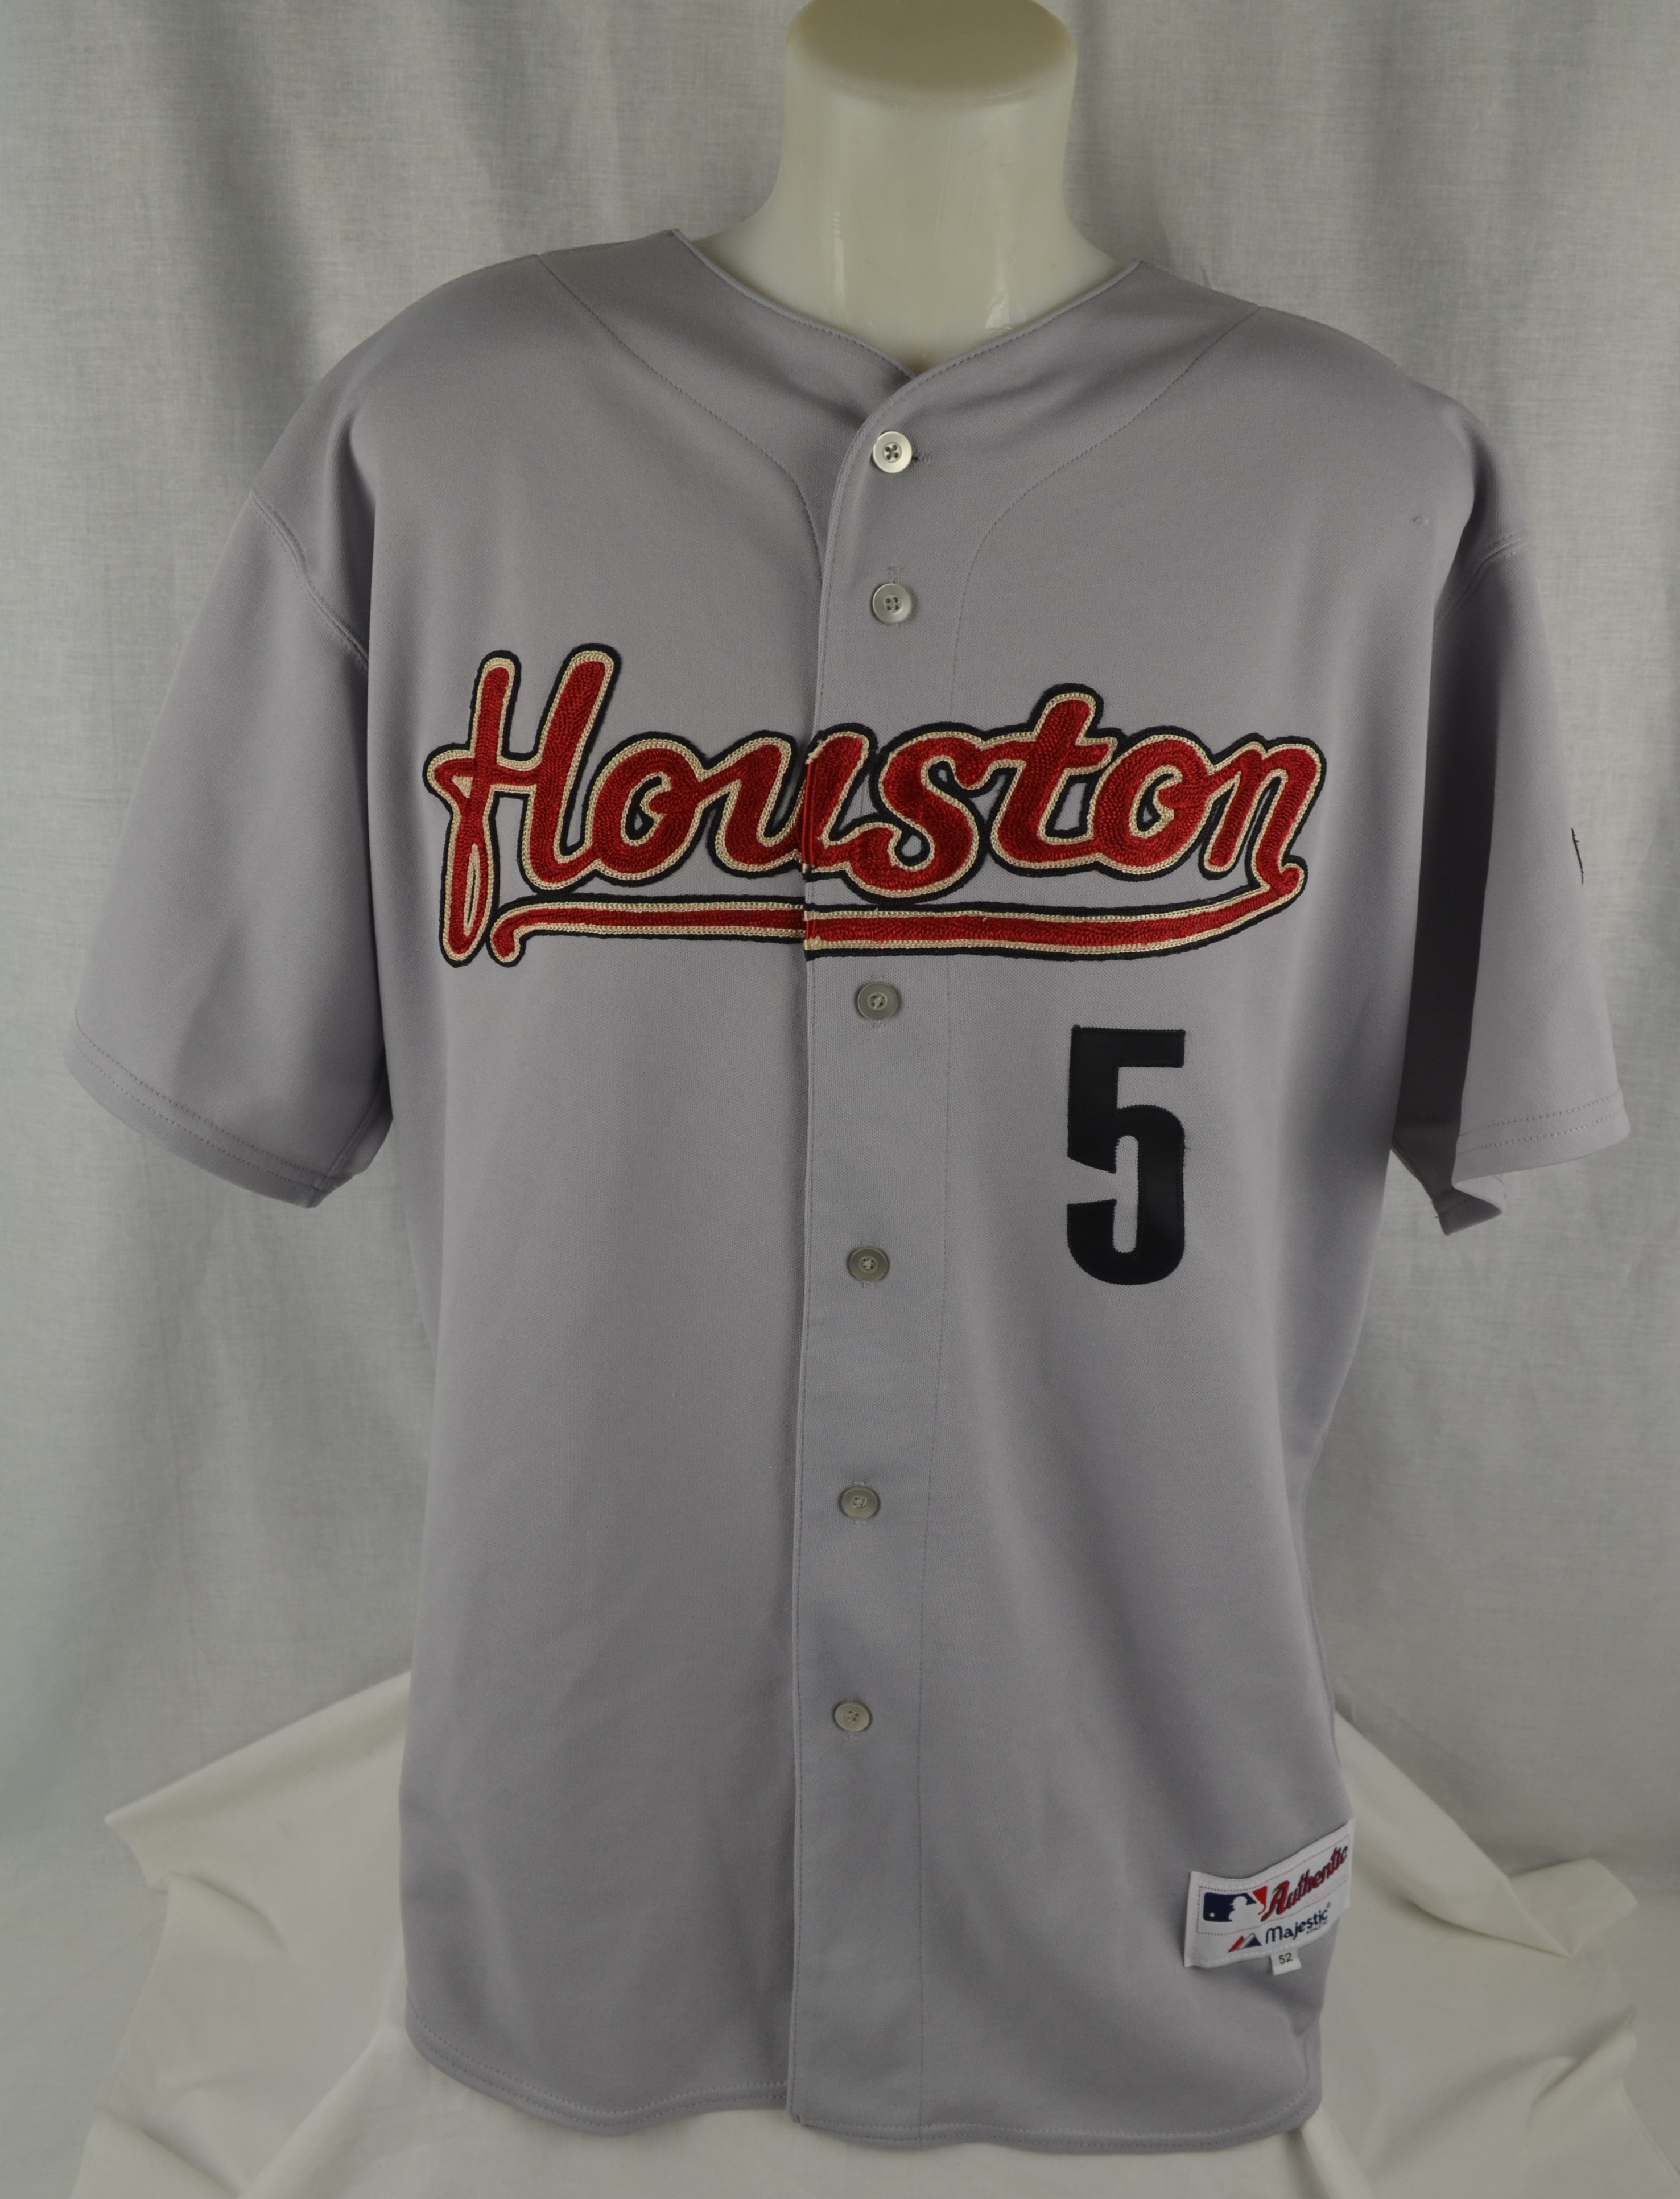 Jeff Bagwell Autographed Jersey White Houston Astros Majestic